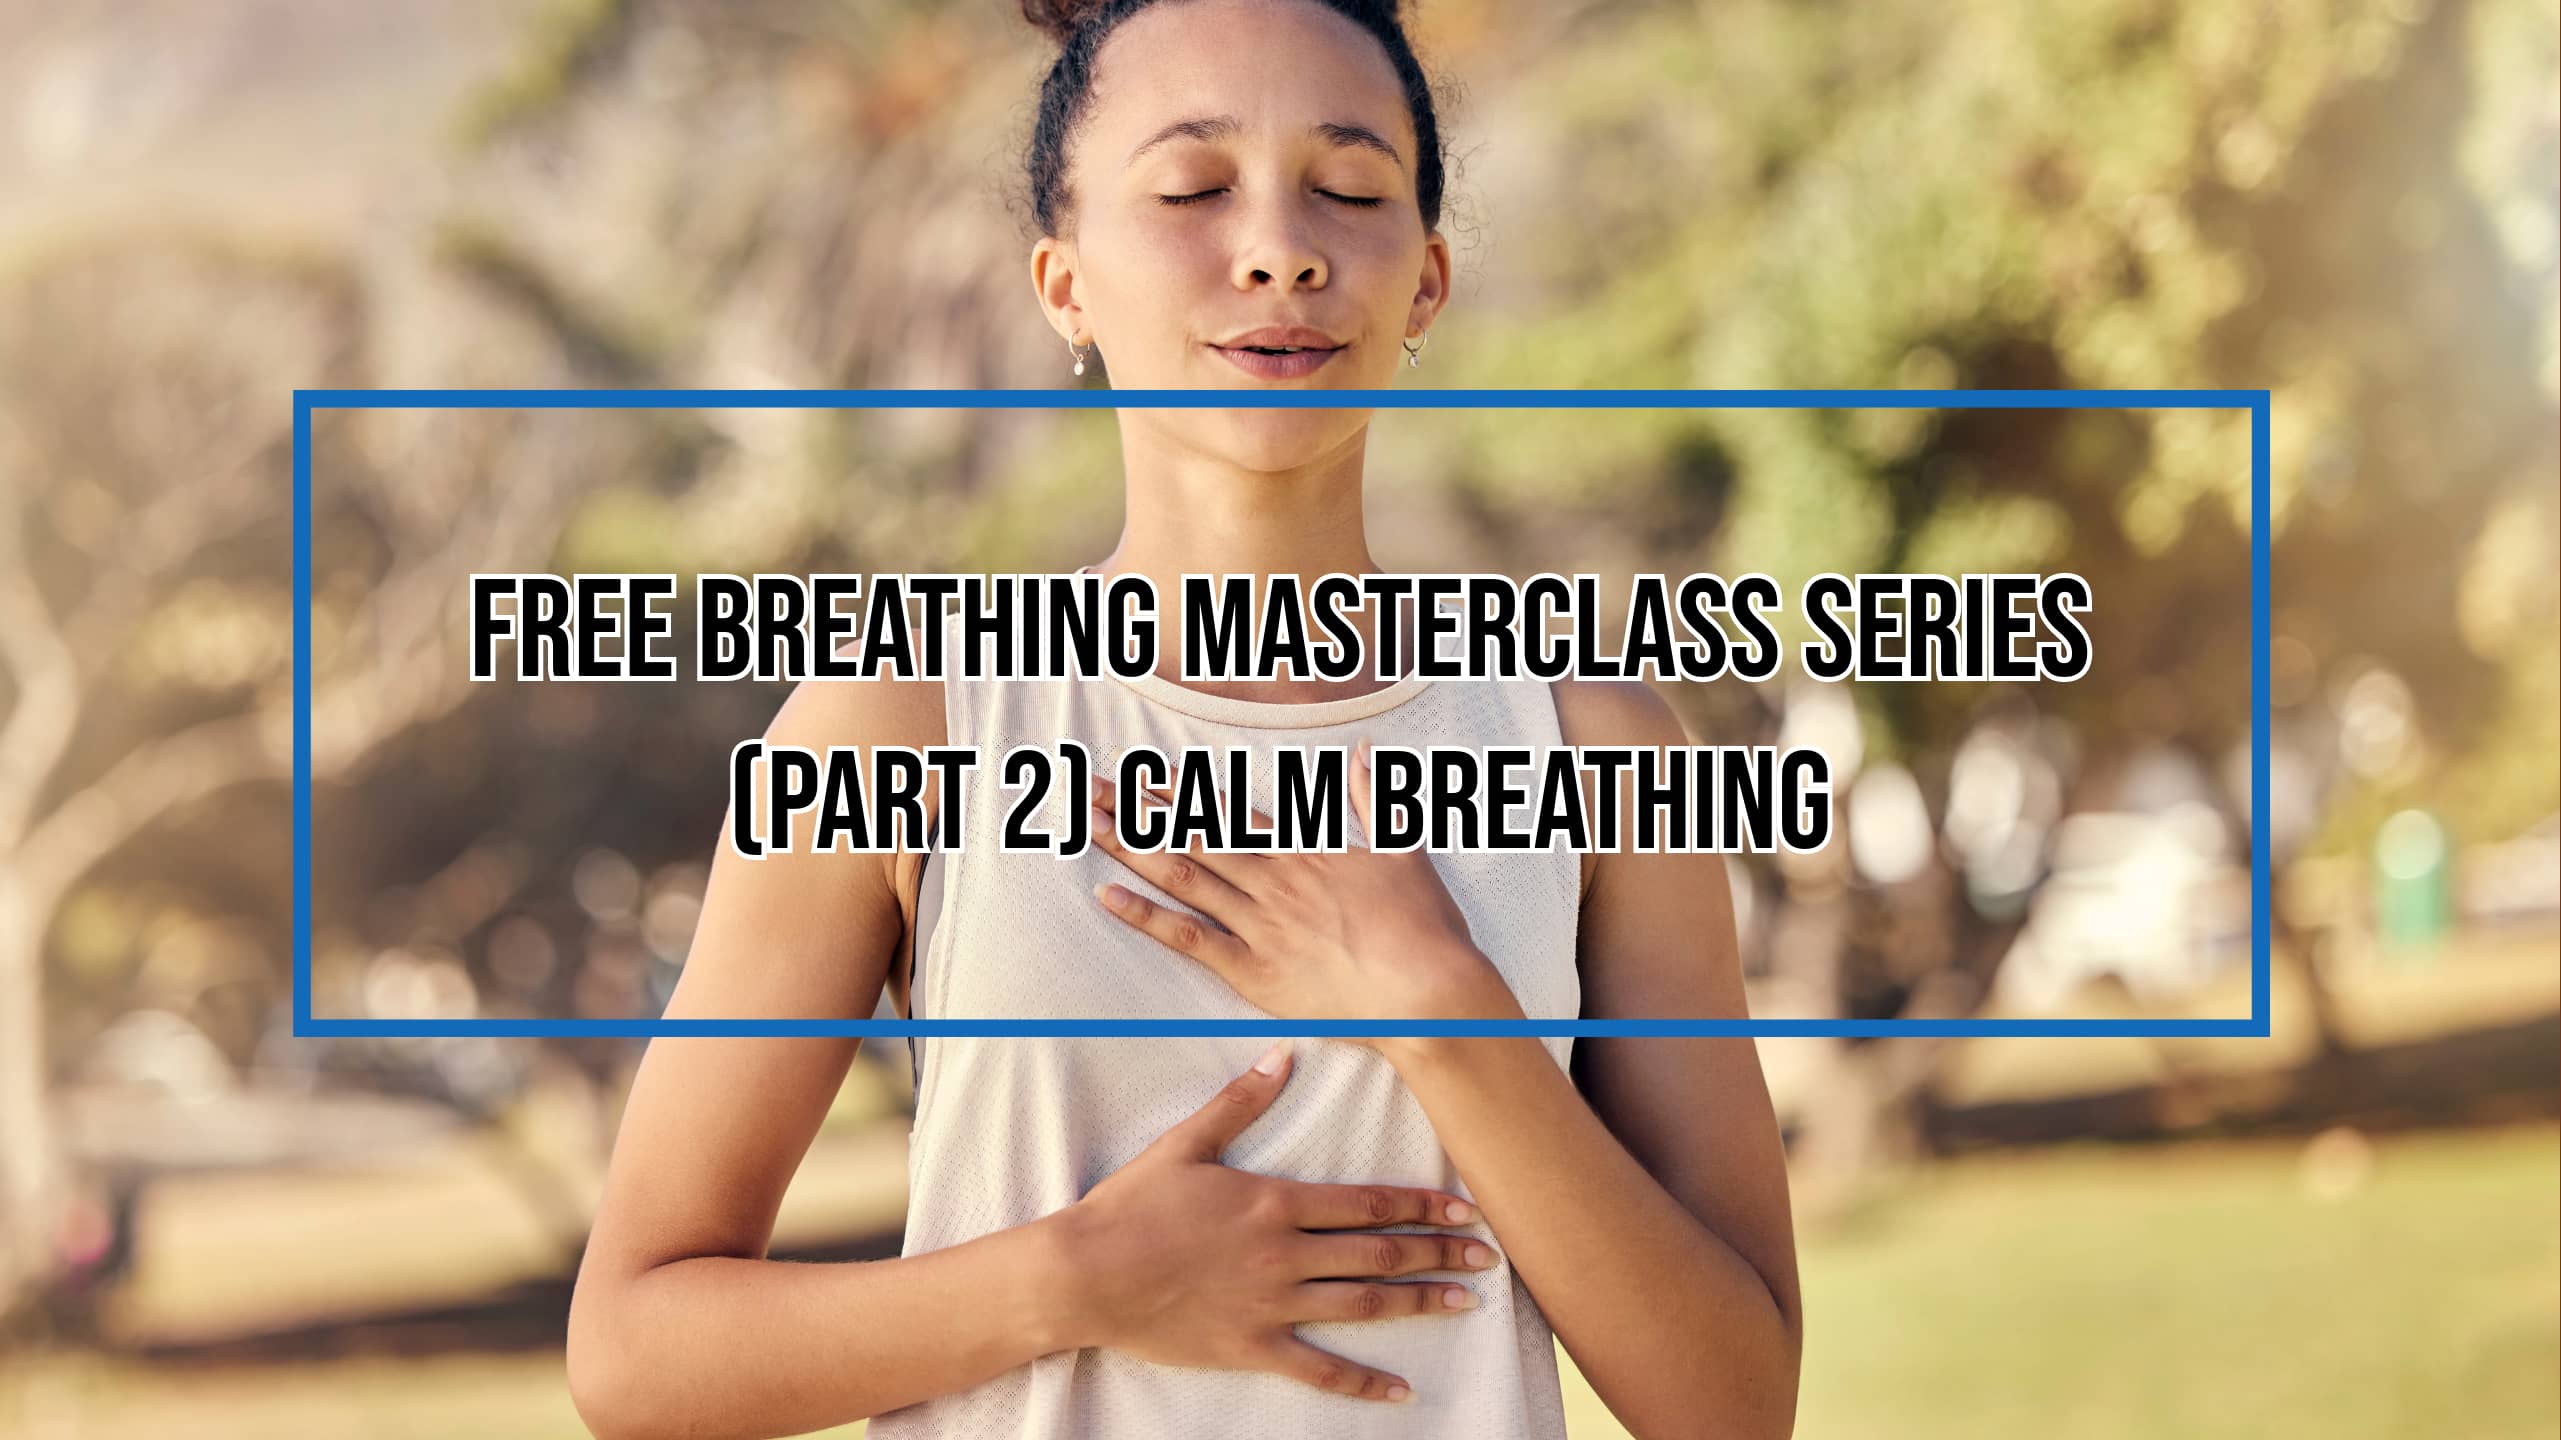 Free Breathing Masterclass Series (Part 2) Calm Breathing